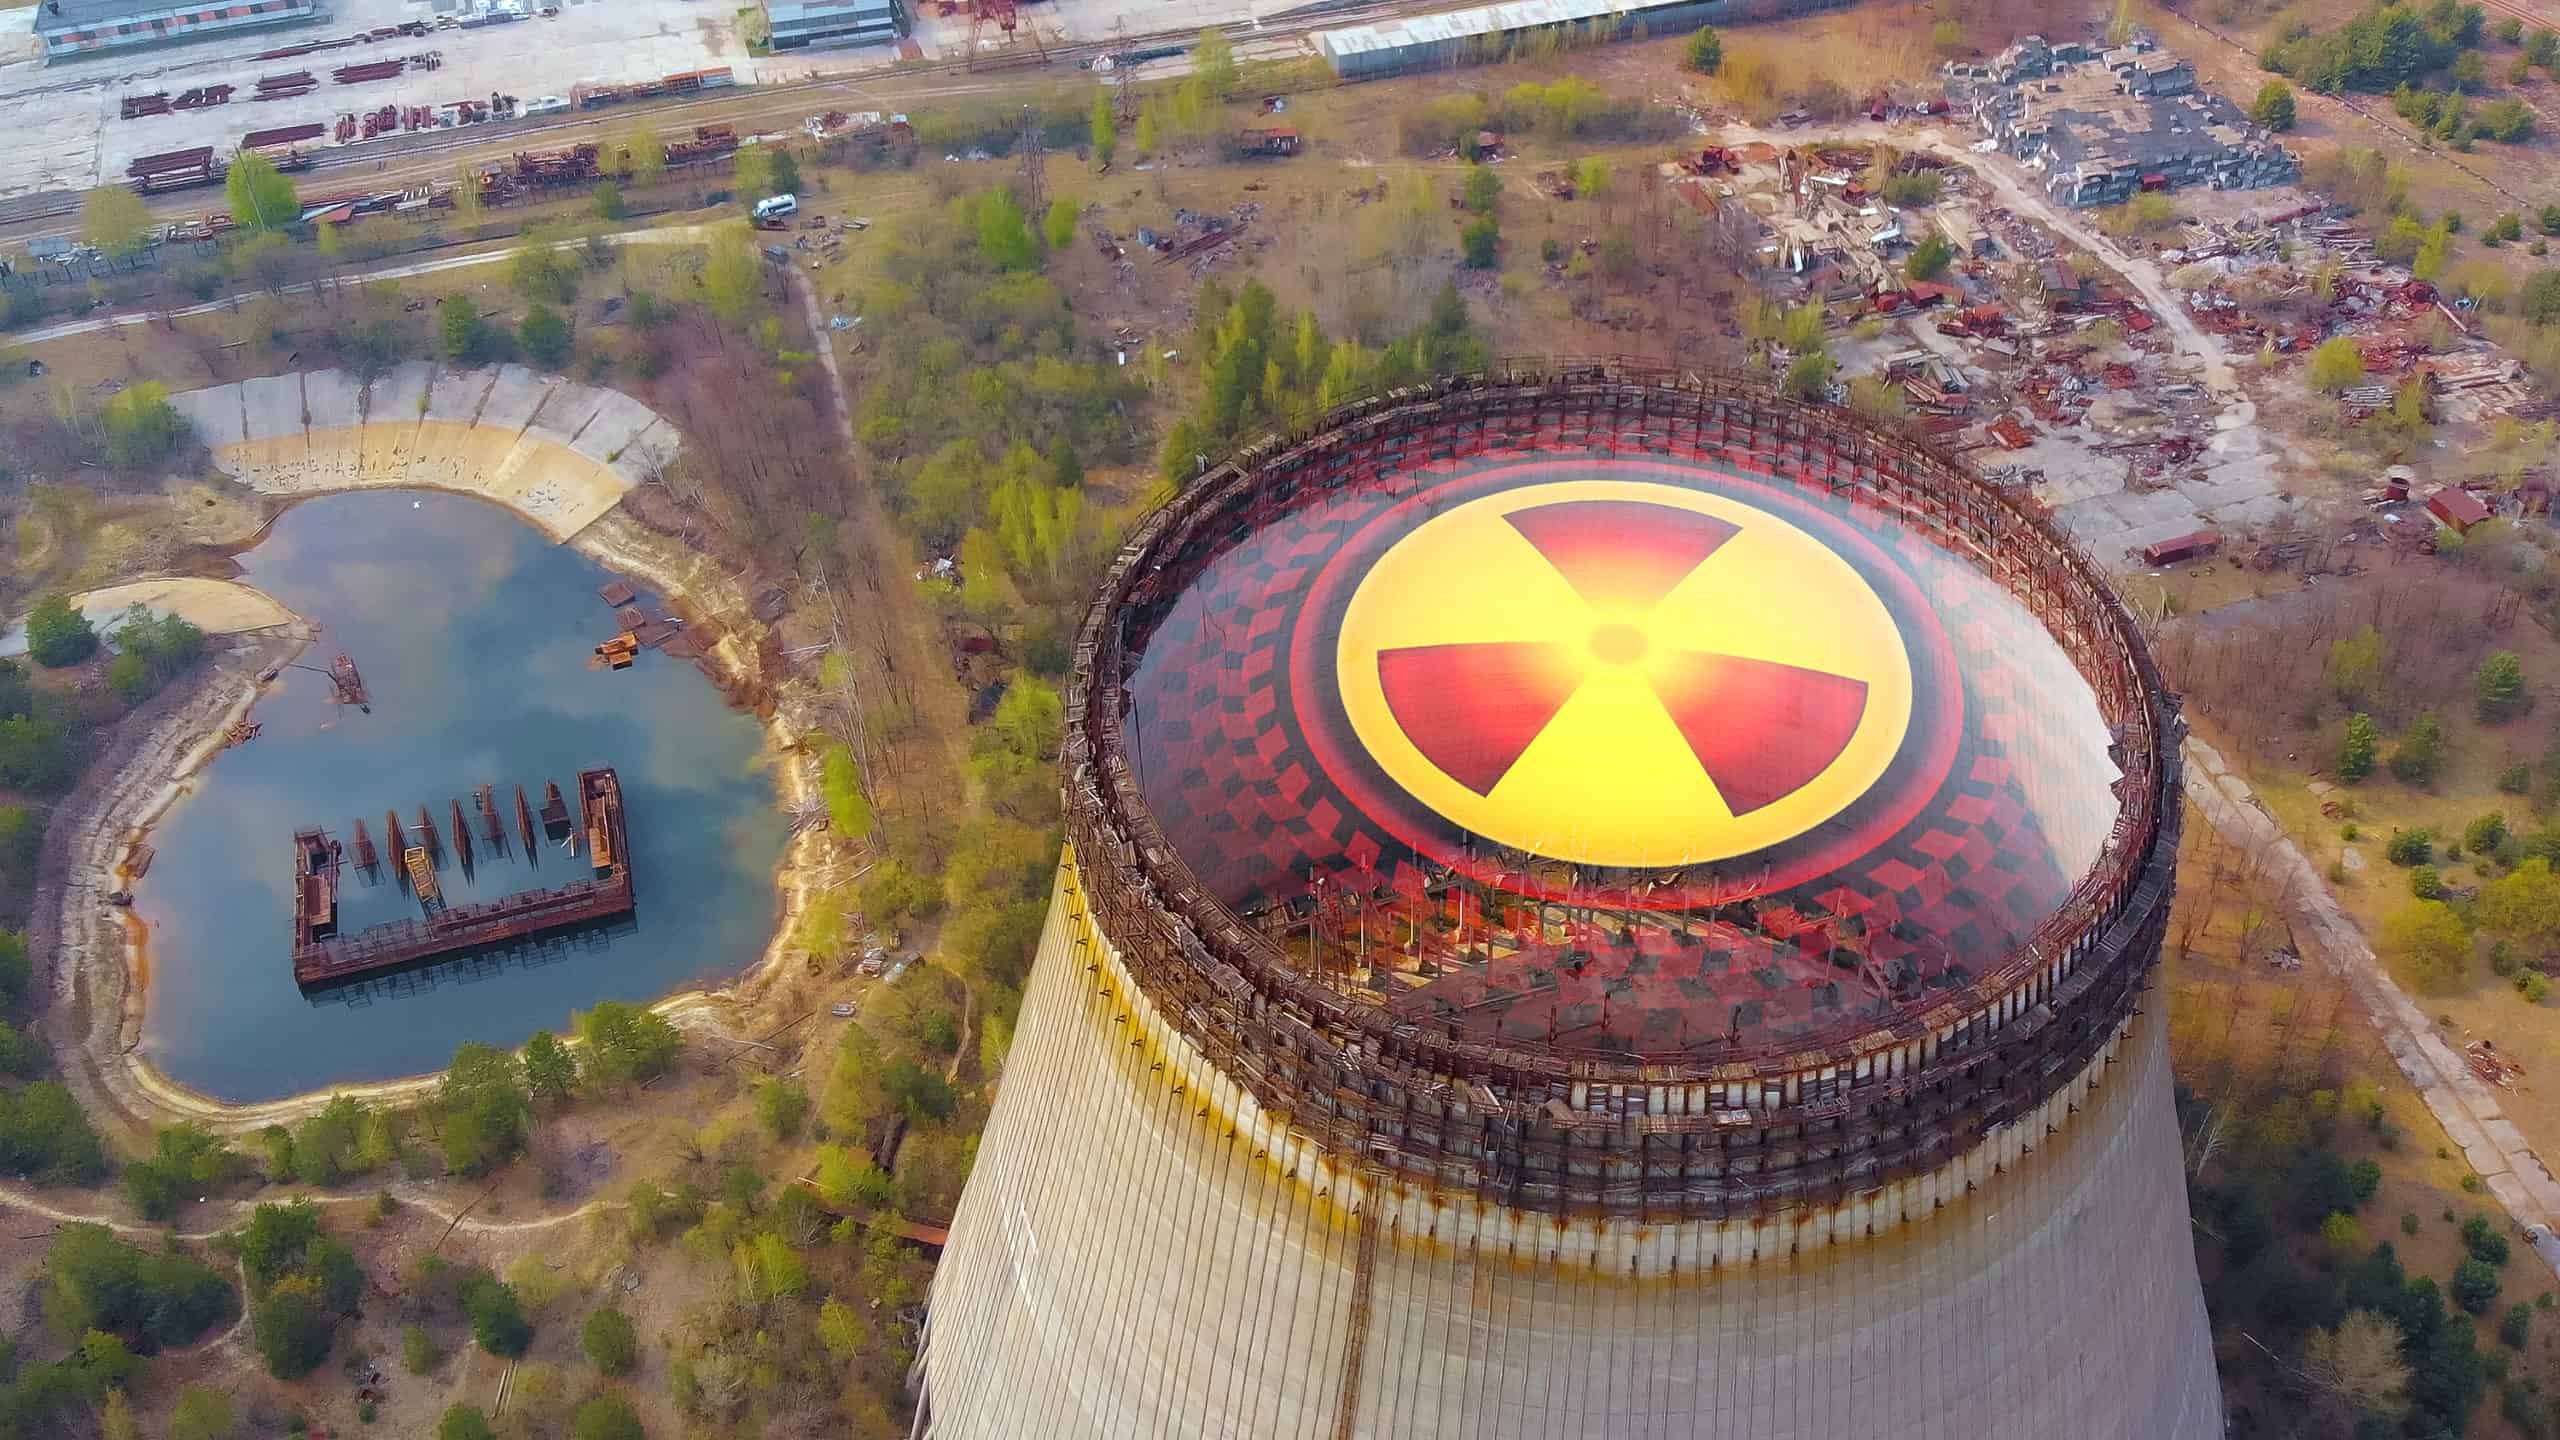 Chernobyl disaster. Radioactive zones near the reactor in Chernobyl. Sign of radiation on the background of the cooling tower in Chernobyl. Radiation contamination area near the Chernobyl reactor.